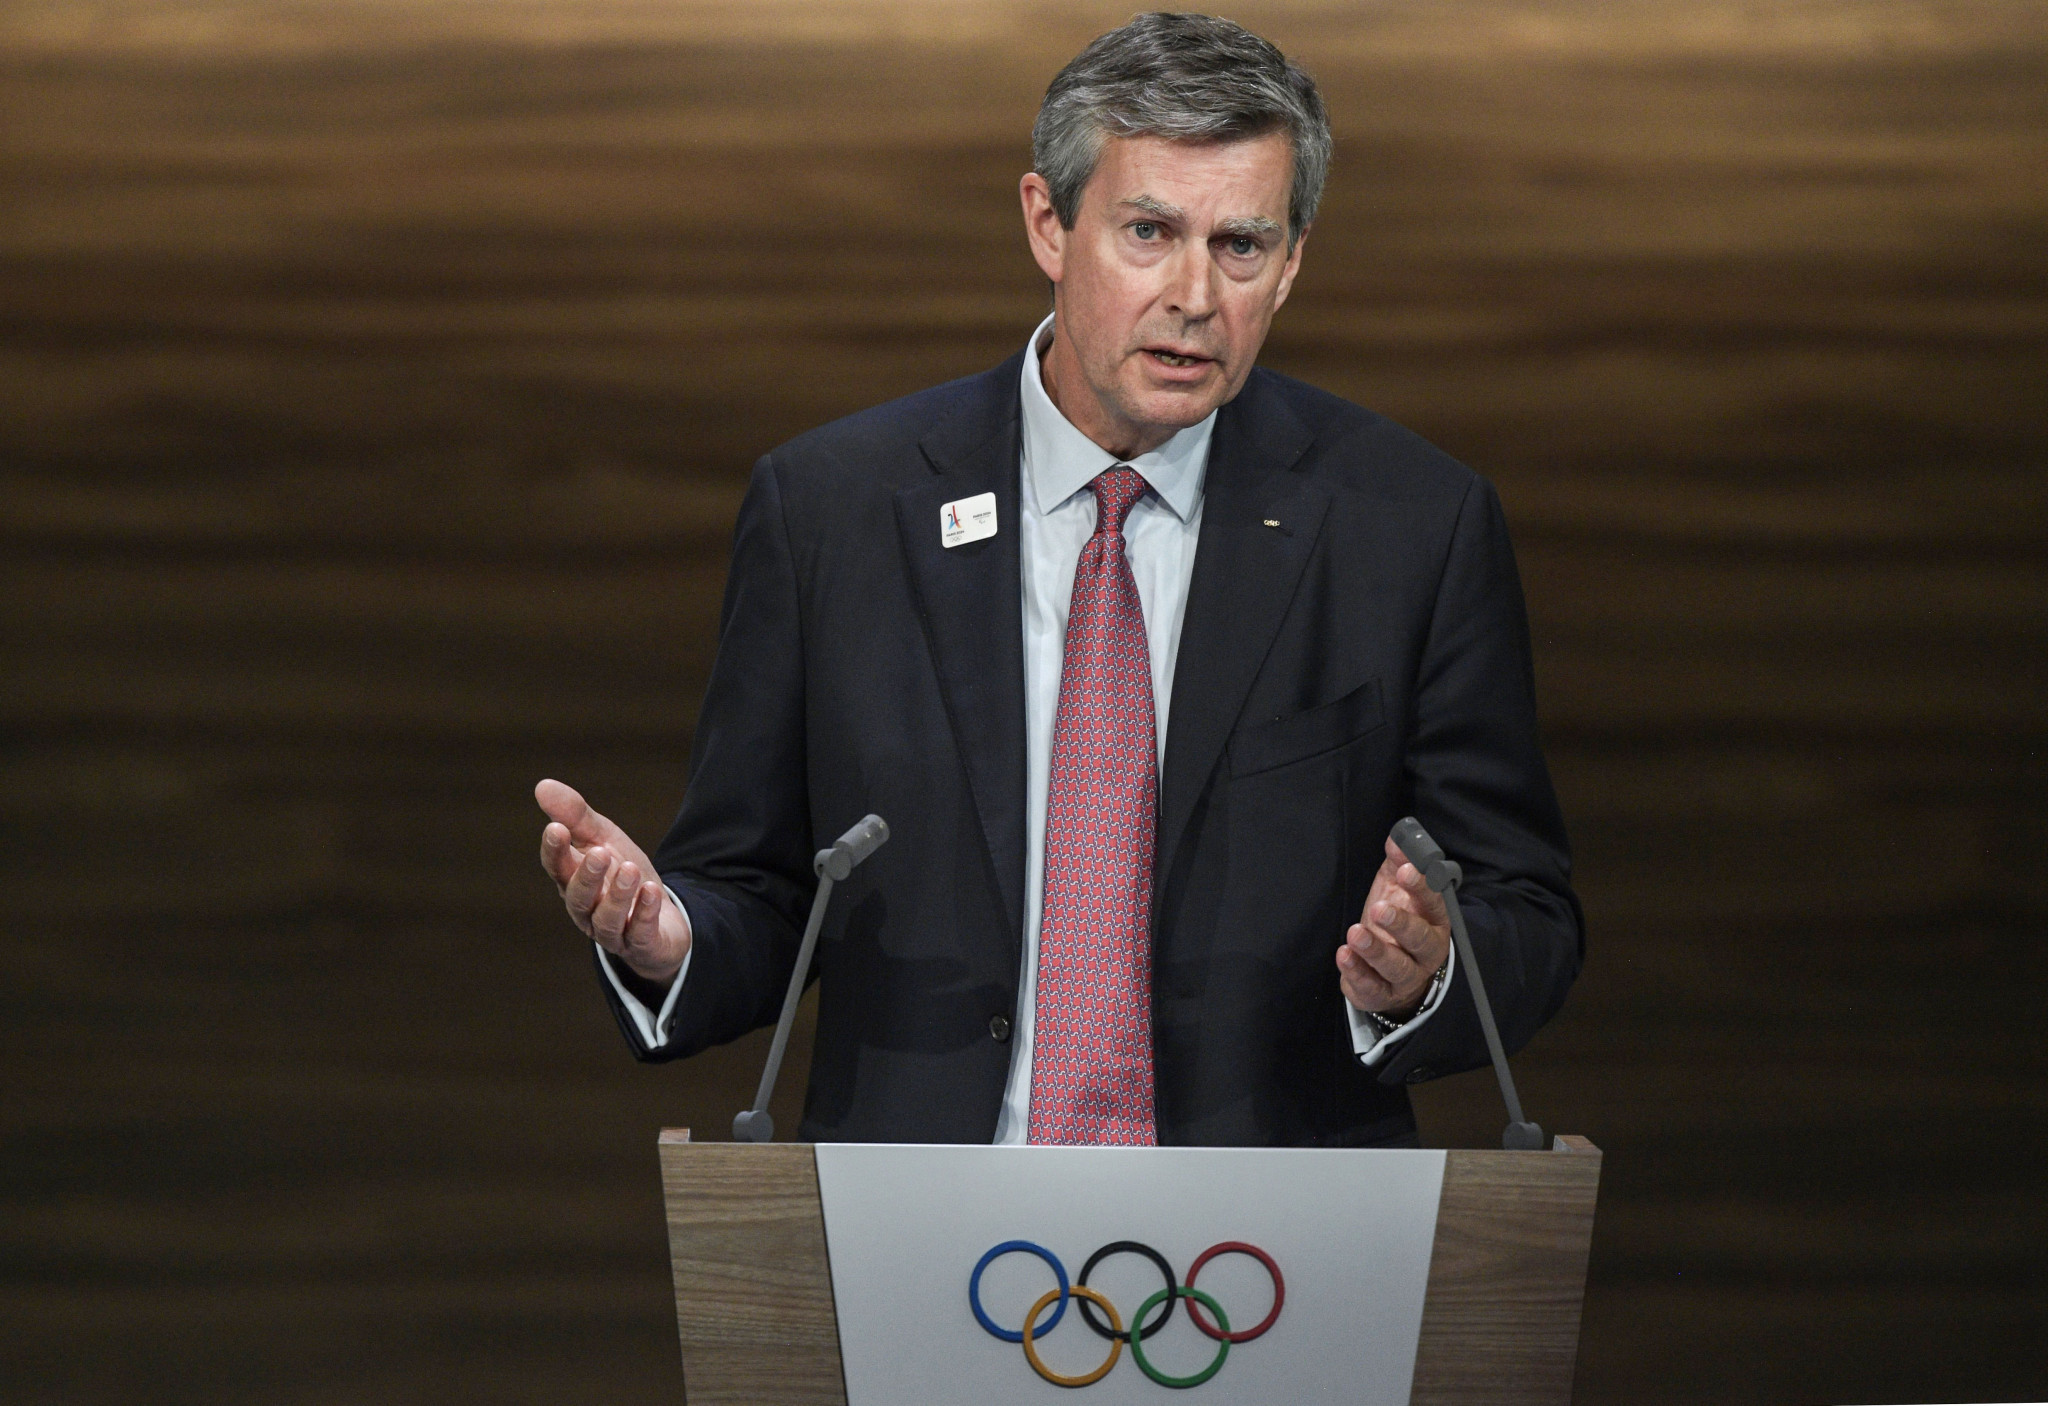 Beckers-Vieujant claims Drut comments have created confusion around Paris 2024